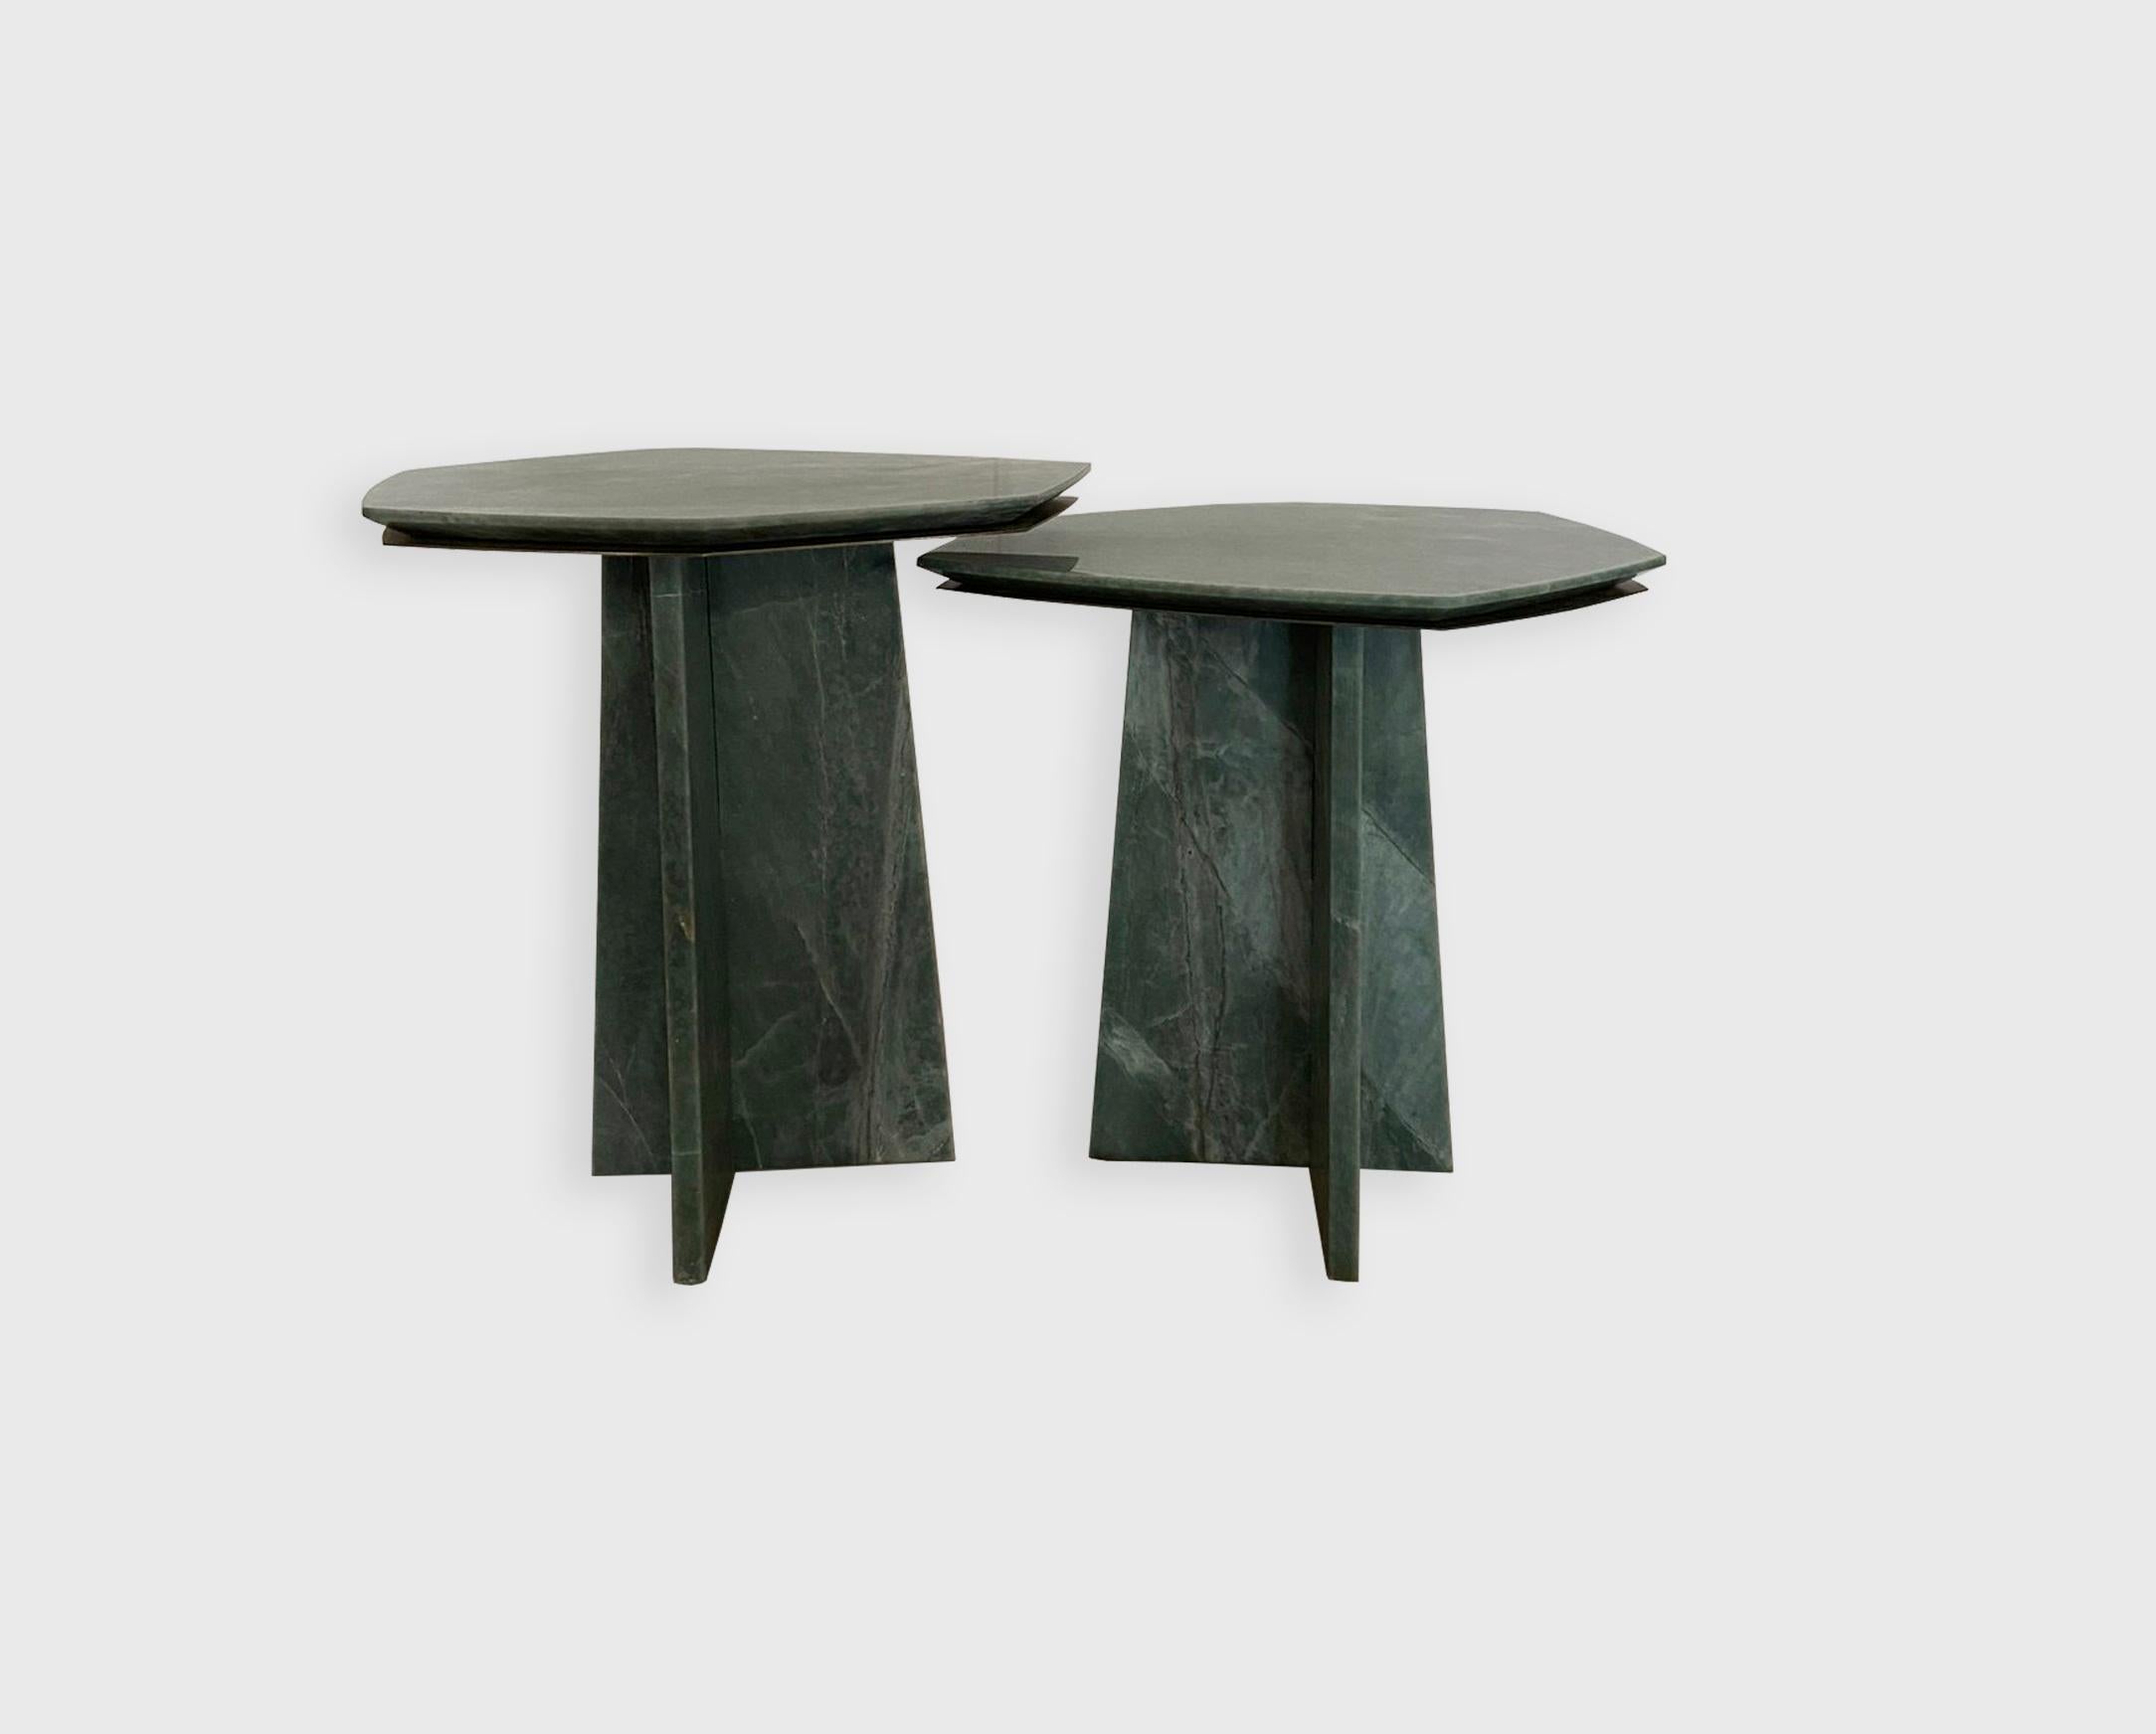 Small Geometrik Emerald side table by Atra Design
Limited Edition of 5
Dimensions: D 49.2 x W 36.6 x H 48 cm
Materials: emerald quartzite, brass
Available in other size.

Atra Design
We are Atra, a furniture brand produced by Atra form a mexico